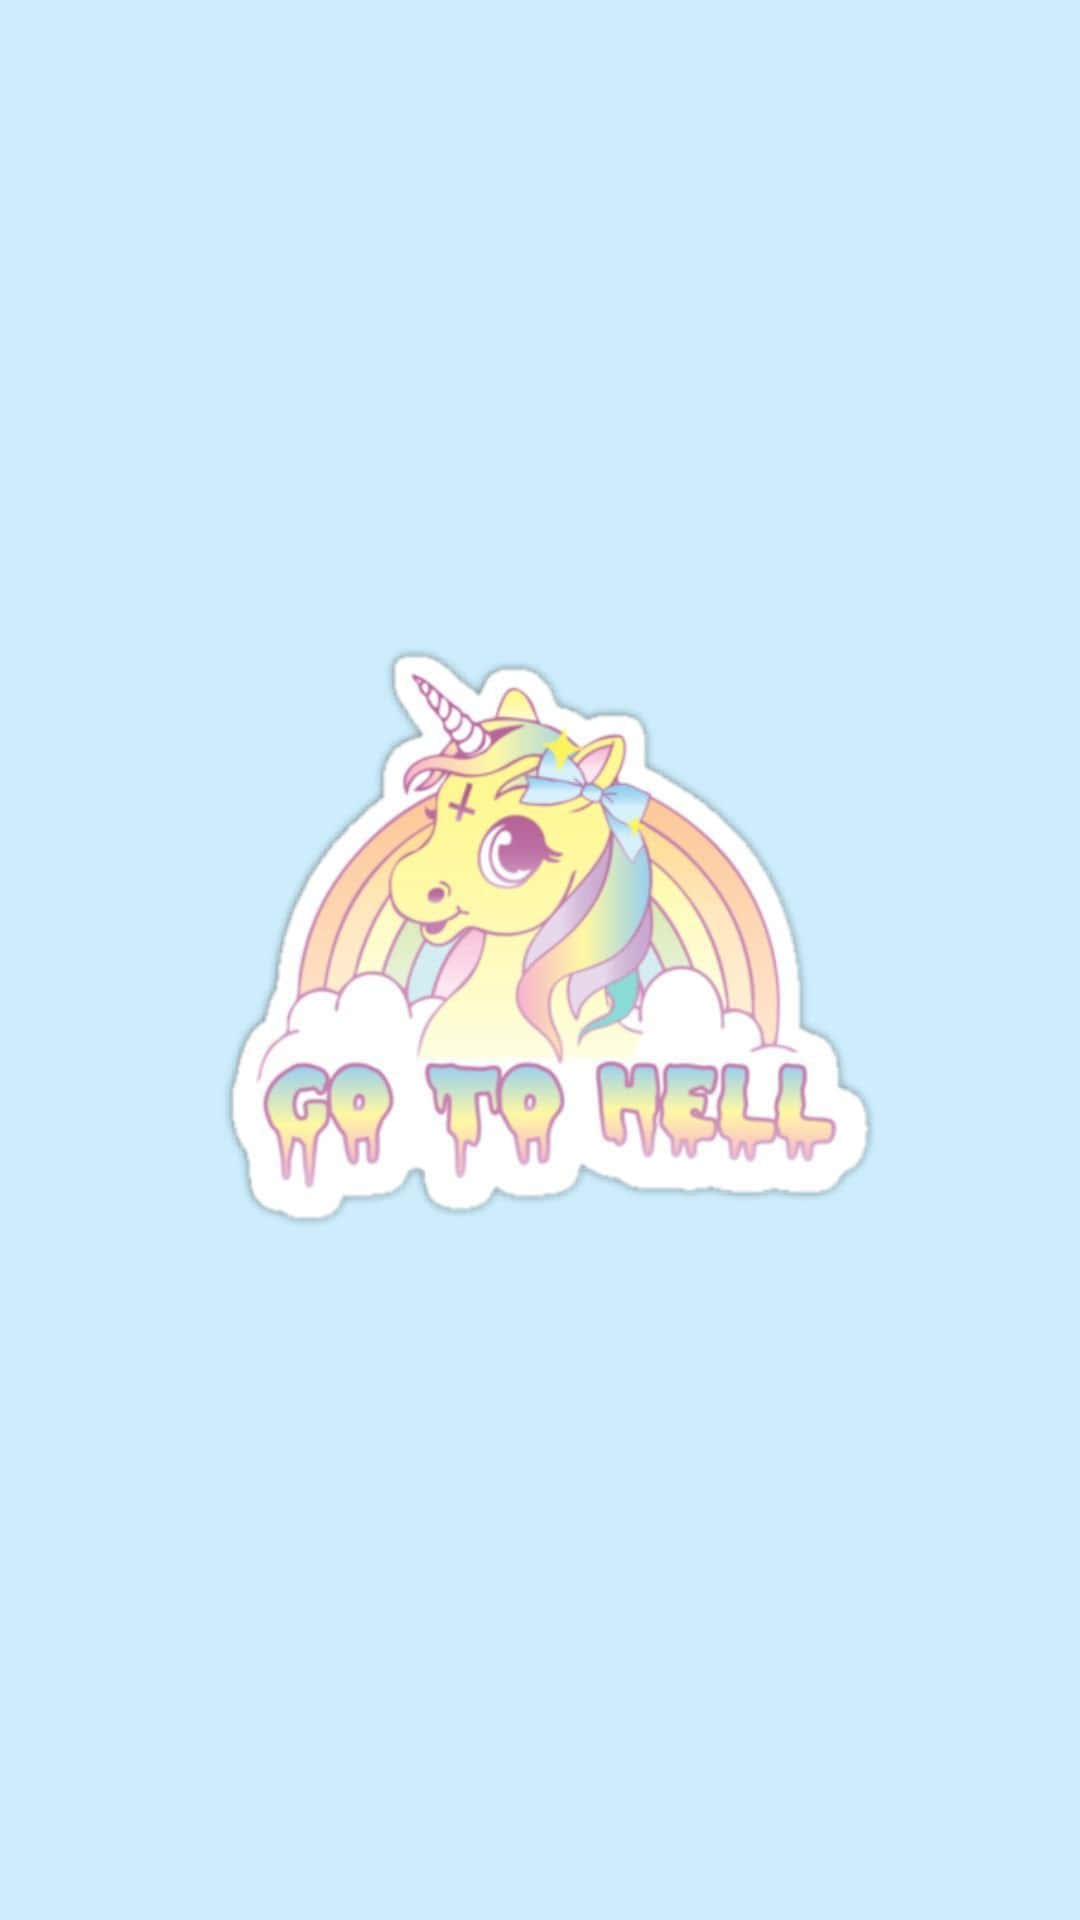 Cute Unicorn Go To Hell Illustration Art Picture